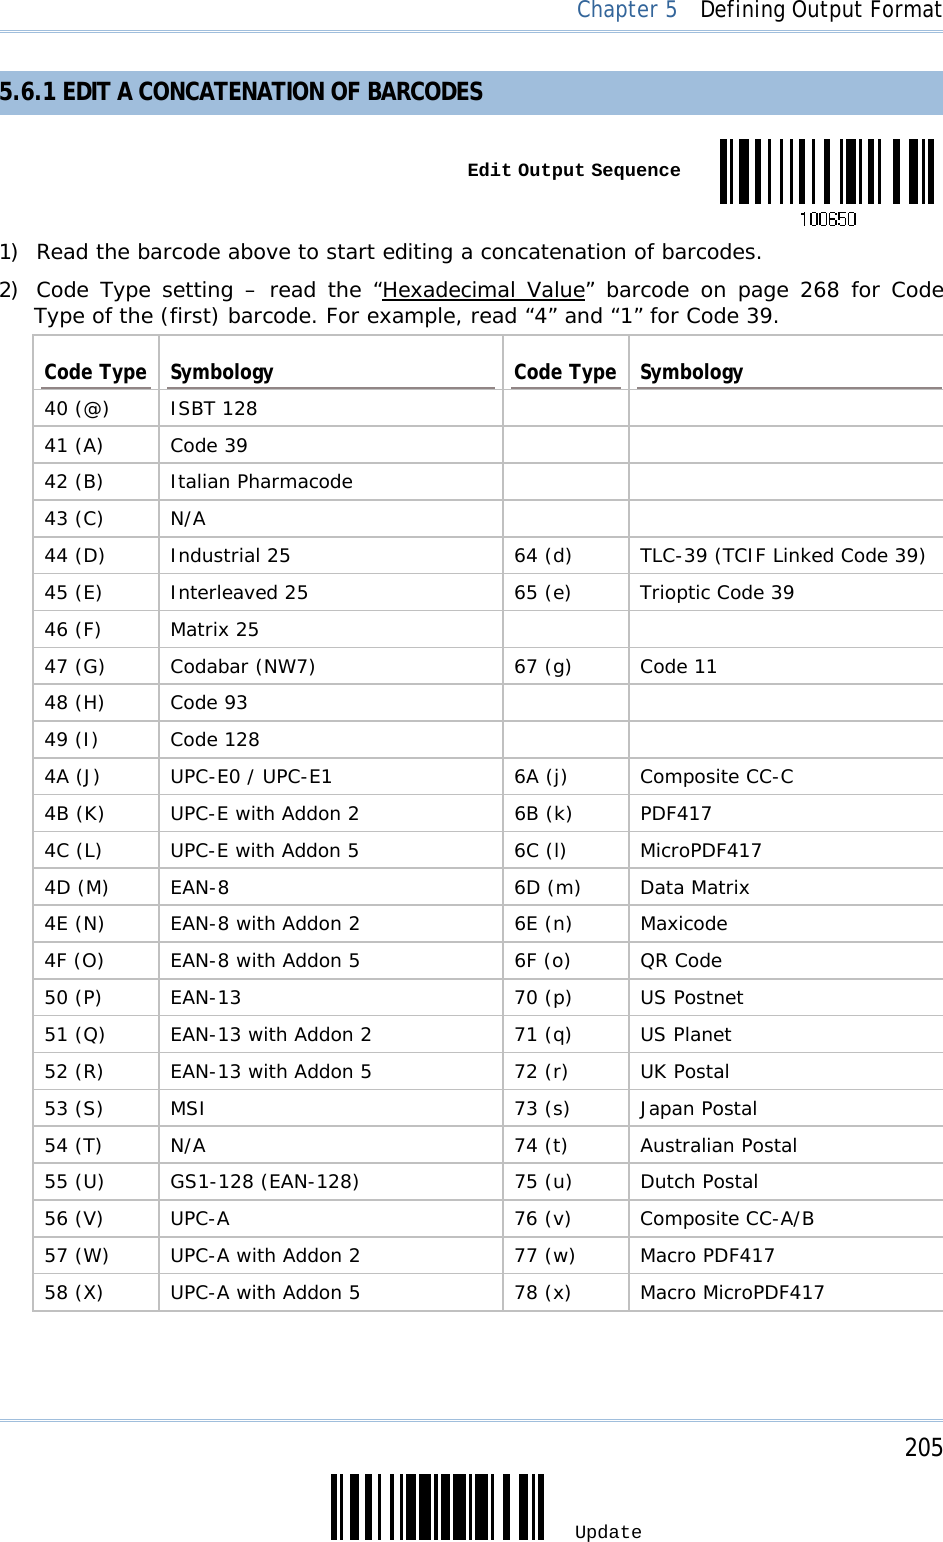     205 Update  Chapter 5  Defining Output Format 5.6.1 EDIT A CONCATENATION OF BARCODES  Edit Output Sequence1) Read the barcode above to start editing a concatenation of barcodes. 2) Code Type setting – read the “Hexadecimal Value” barcode on page 268 for Code Type of the (first) barcode. For example, read “4” and “1” for Code 39. Code Type  Symbology  Code Type Symbology 40 (@)  ISBT 128     41 (A)  Code 39     42 (B)  Italian Pharmacode     43 (C)  N/A     44 (D)  Industrial 25  64 (d)  TLC-39 (TCIF Linked Code 39) 45 (E)  Interleaved 25  65 (e)  Trioptic Code 39 46 (F)  Matrix 25     47 (G)  Codabar (NW7)  67 (g)  Code 11 48 (H)  Code 93     49 (I)  Code 128     4A (J)  UPC-E0 / UPC-E1  6A (j)  Composite CC-C 4B (K)  UPC-E with Addon 2  6B (k)  PDF417 4C (L)  UPC-E with Addon 5  6C (l)  MicroPDF417 4D (M)  EAN-8  6D (m)  Data Matrix 4E (N)  EAN-8 with Addon 2  6E (n)  Maxicode 4F (O)  EAN-8 with Addon 5  6F (o)  QR Code 50 (P)  EAN-13  70 (p)  US Postnet 51 (Q)  EAN-13 with Addon 2  71 (q)  US Planet 52 (R)  EAN-13 with Addon 5  72 (r)  UK Postal 53 (S)  MSI  73 (s)  Japan Postal 54 (T)  N/A  74 (t)  Australian Postal 55 (U)  GS1-128 (EAN-128)  75 (u)  Dutch Postal 56 (V)  UPC-A  76 (v)  Composite CC-A/B 57 (W)  UPC-A with Addon 2  77 (w)  Macro PDF417 58 (X)  UPC-A with Addon 5  78 (x)  Macro MicroPDF417  